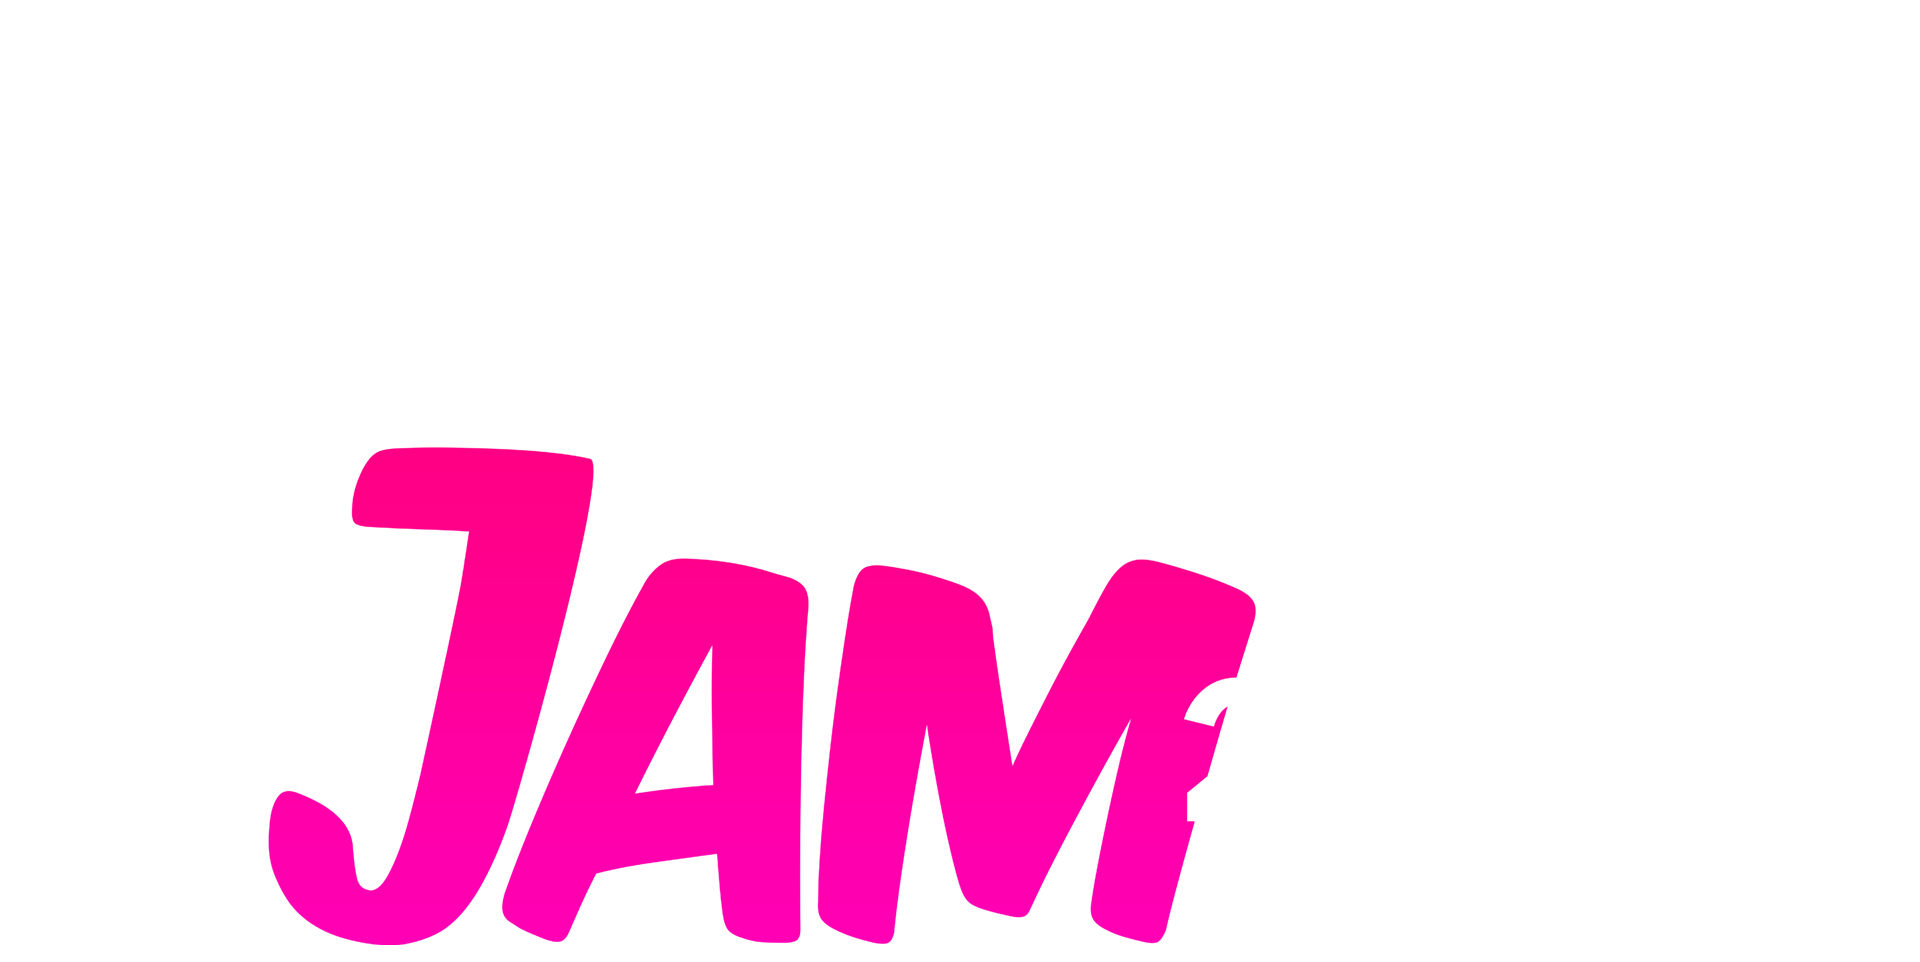 Game made for the GMTK Jam 2020